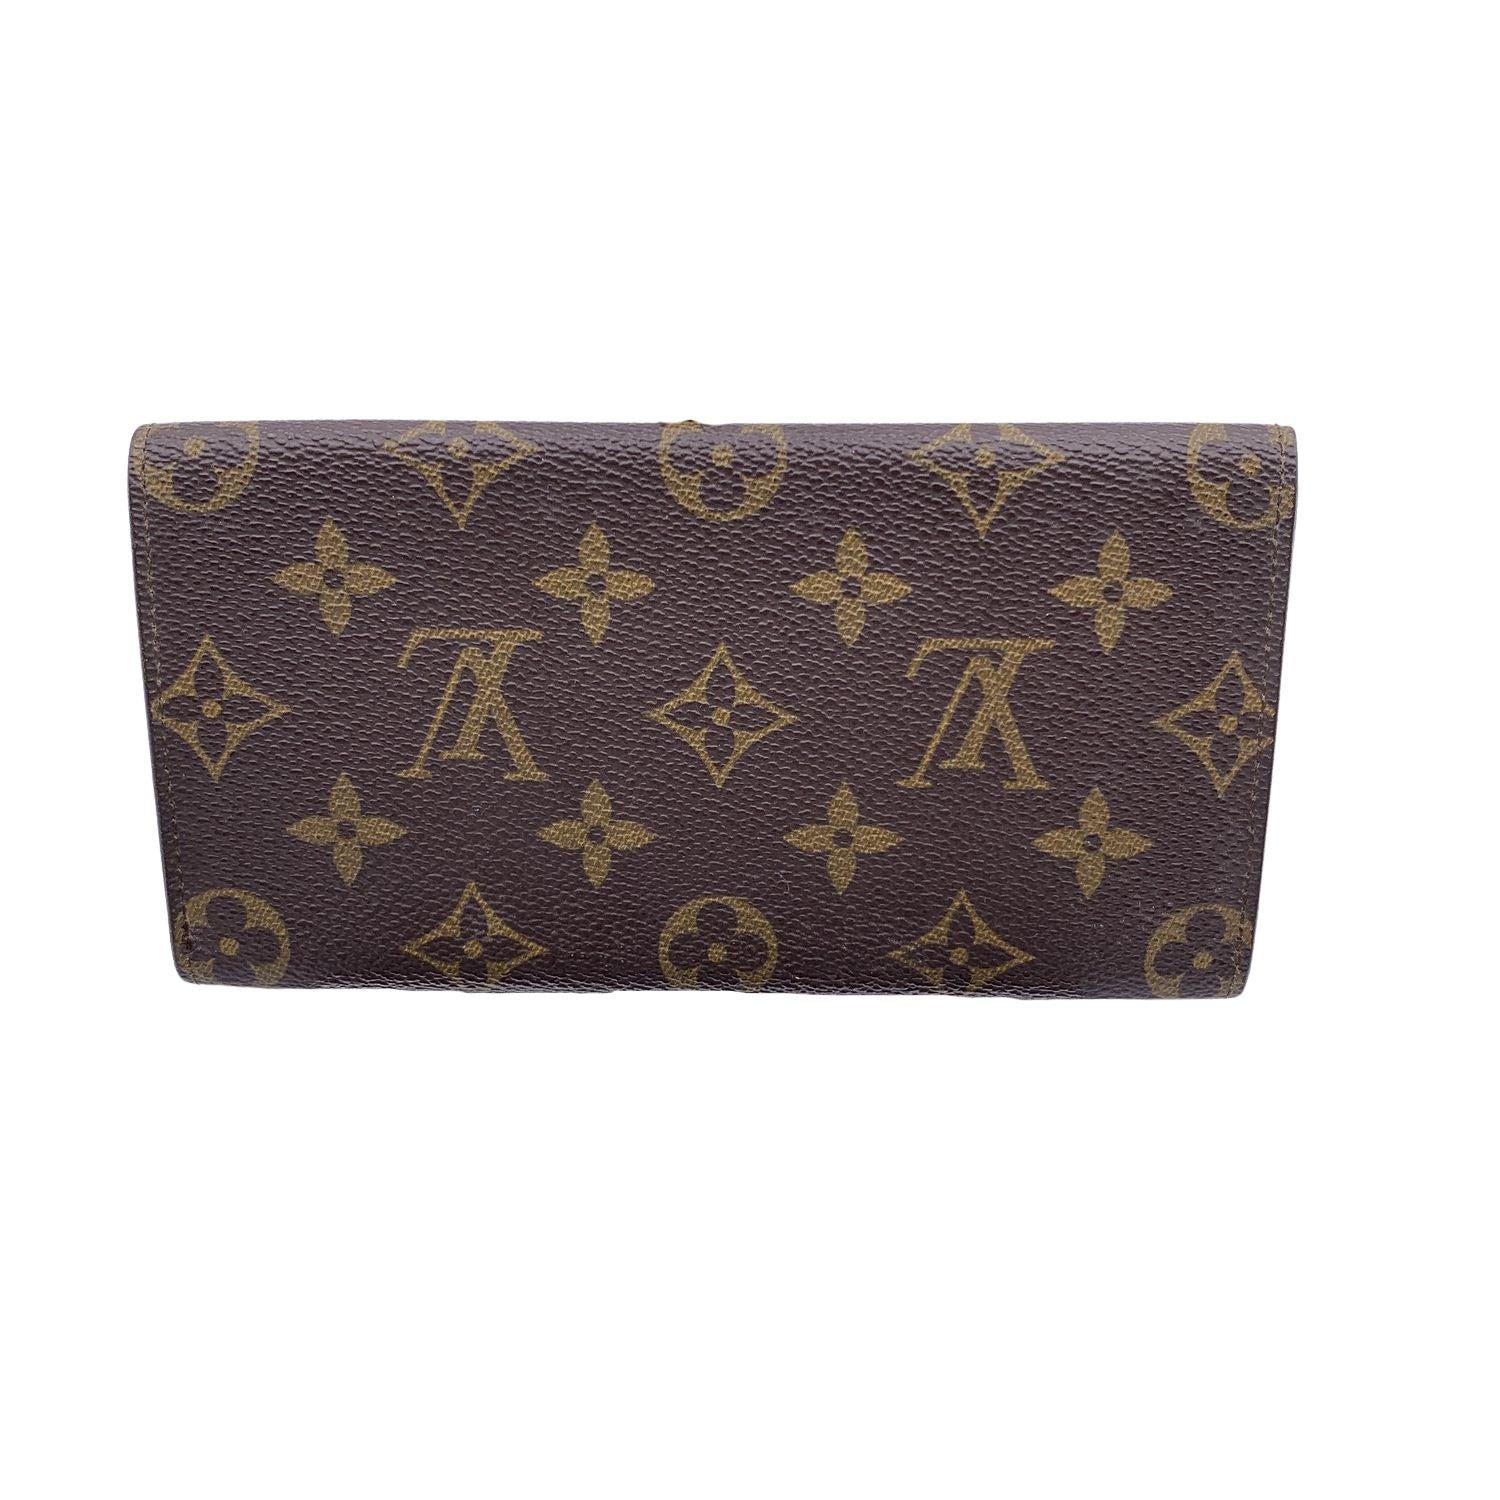 Vintage Louis Vuitton brown monogram canvas Long Bifold Bill Wallet. Flap closure. Leather lining. 1 main compartments inside. 1 open pocket under the flap. 'LOUIS VUITTON Paris - made in France' engraved inside. Details MATERIAL: Cloth COLOR: Brown